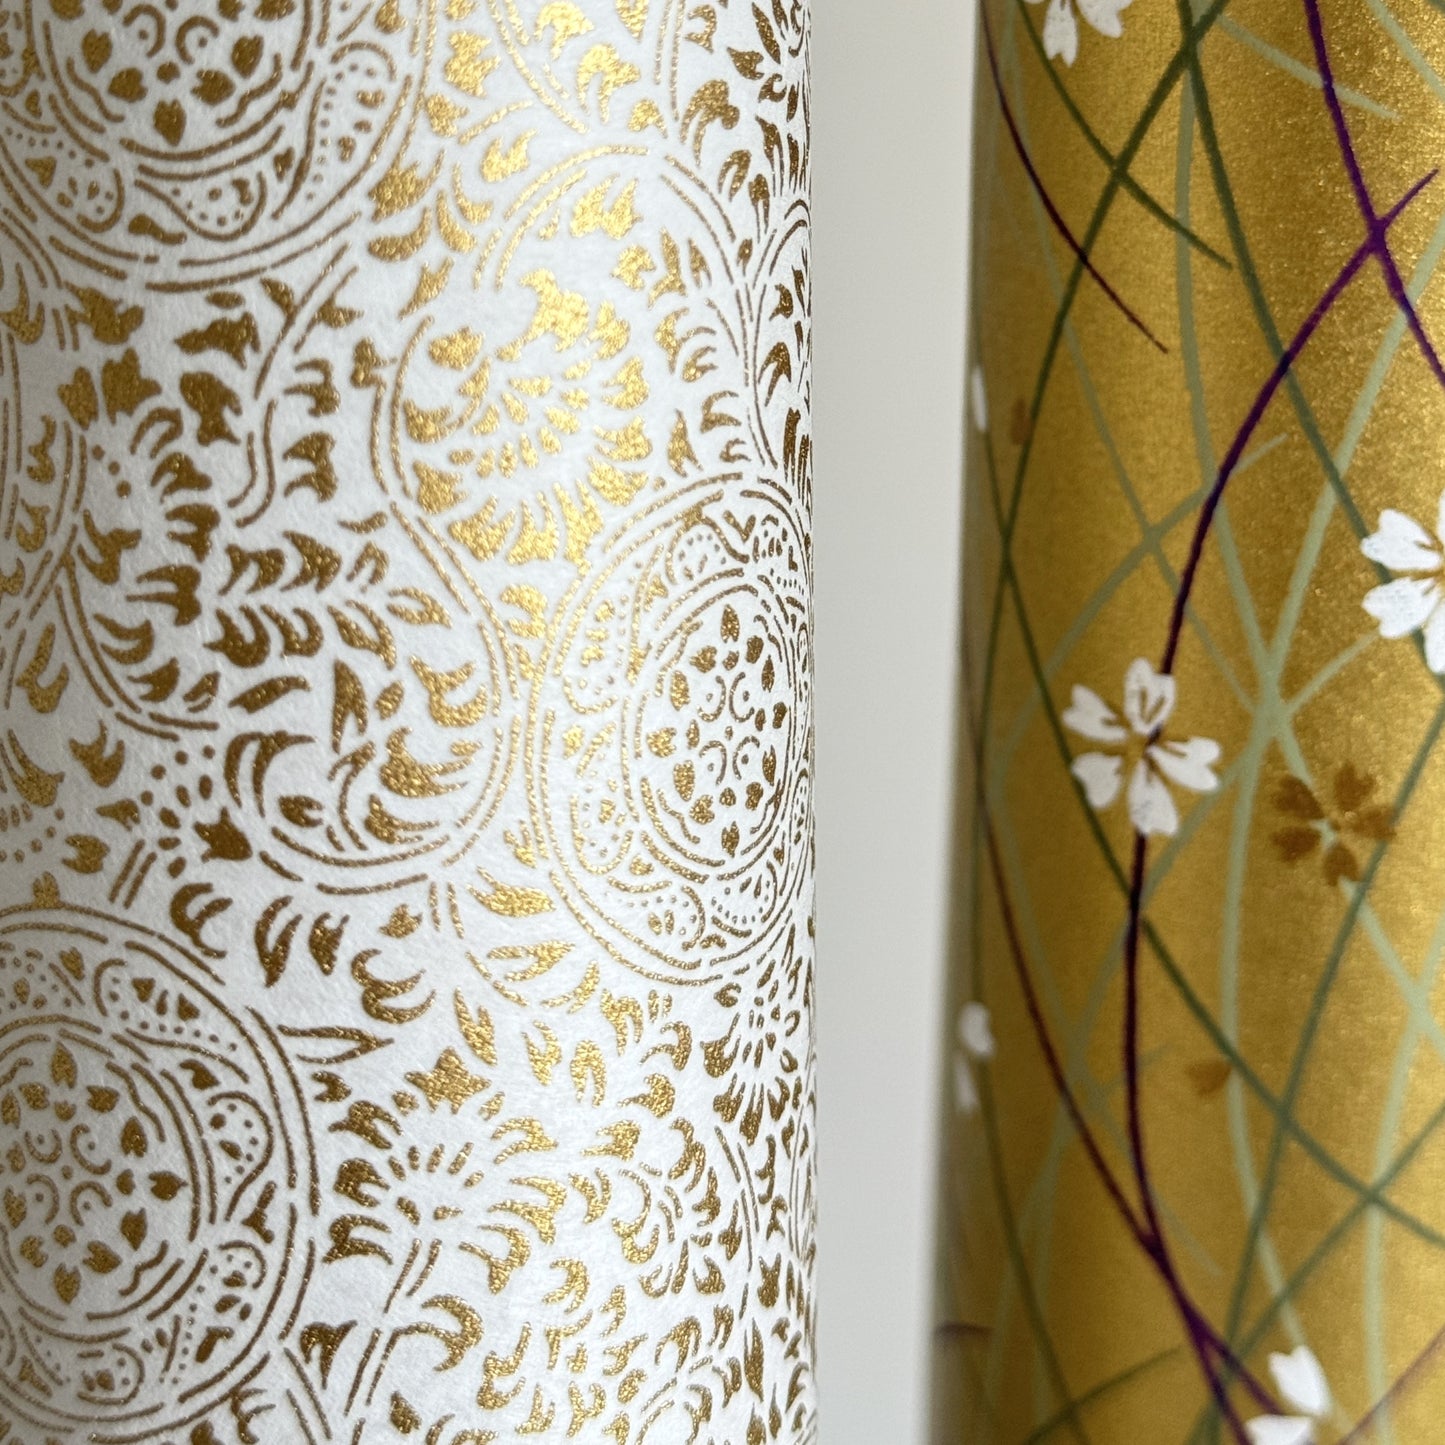 Japanese silkscreen chiyogami paper with an intricate floral pattern in gold on ivory white. Close-up